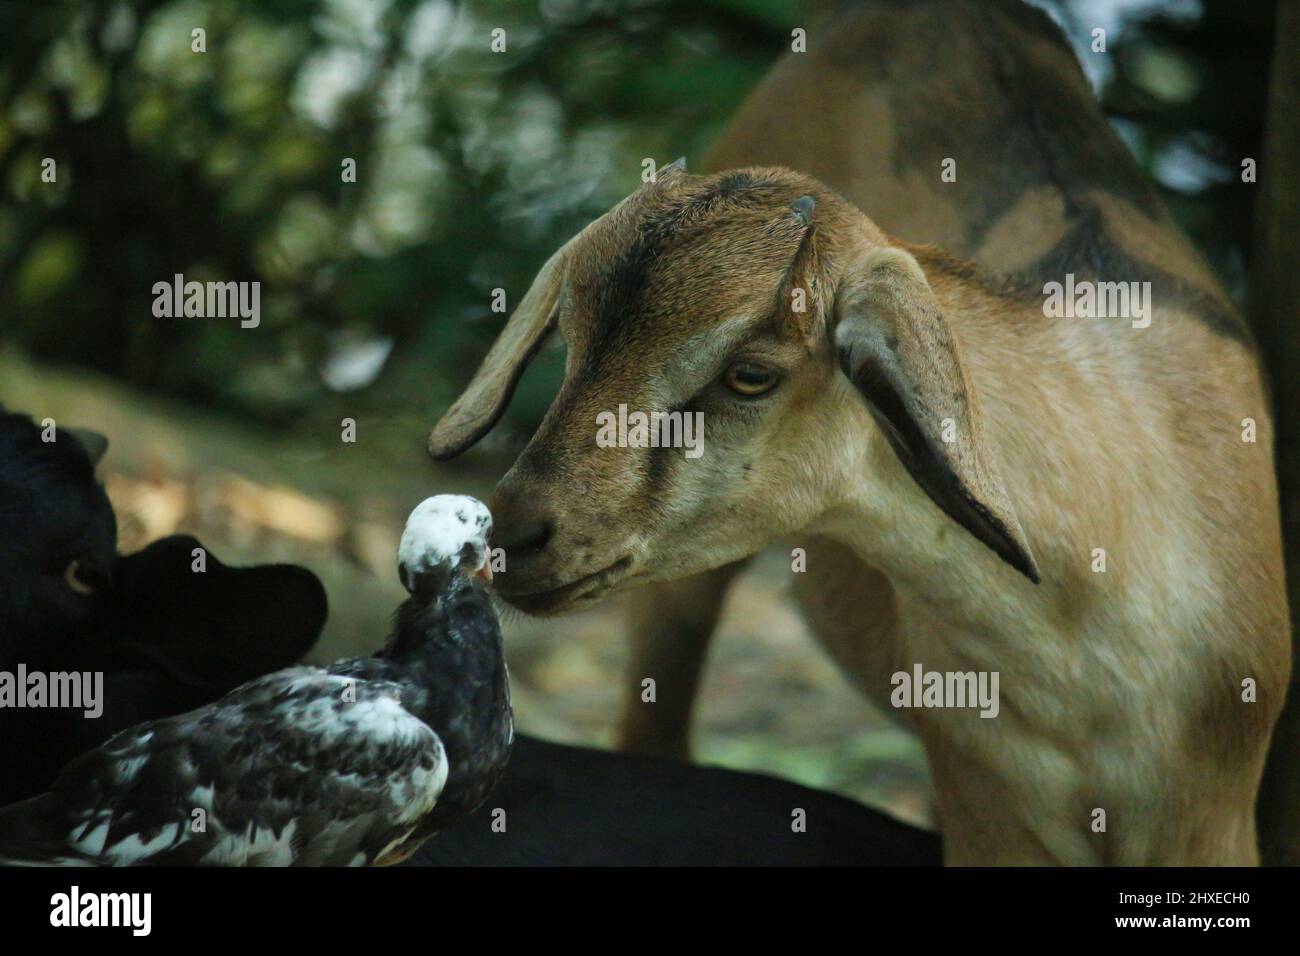 The baby black goat is looking at the baby pigeon. The scene looks very beautiful. Stock Photo